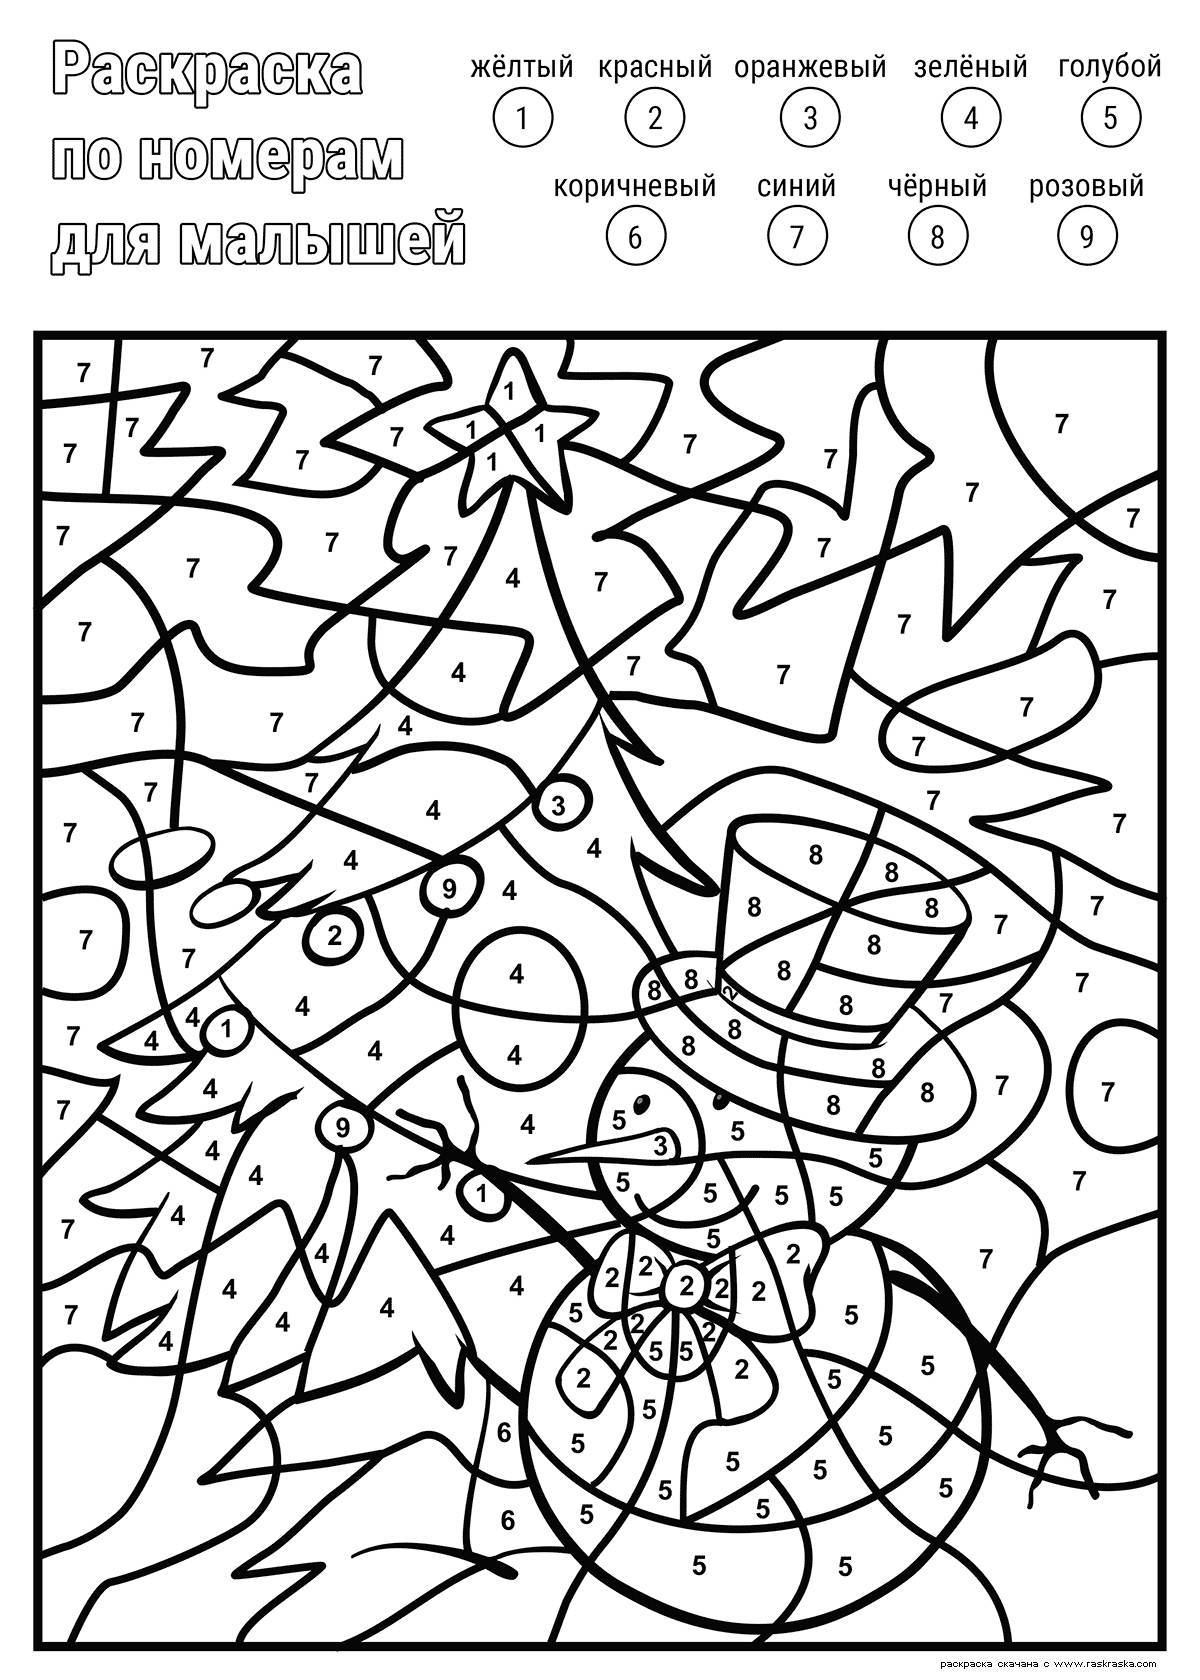 Fun coloring game with color number